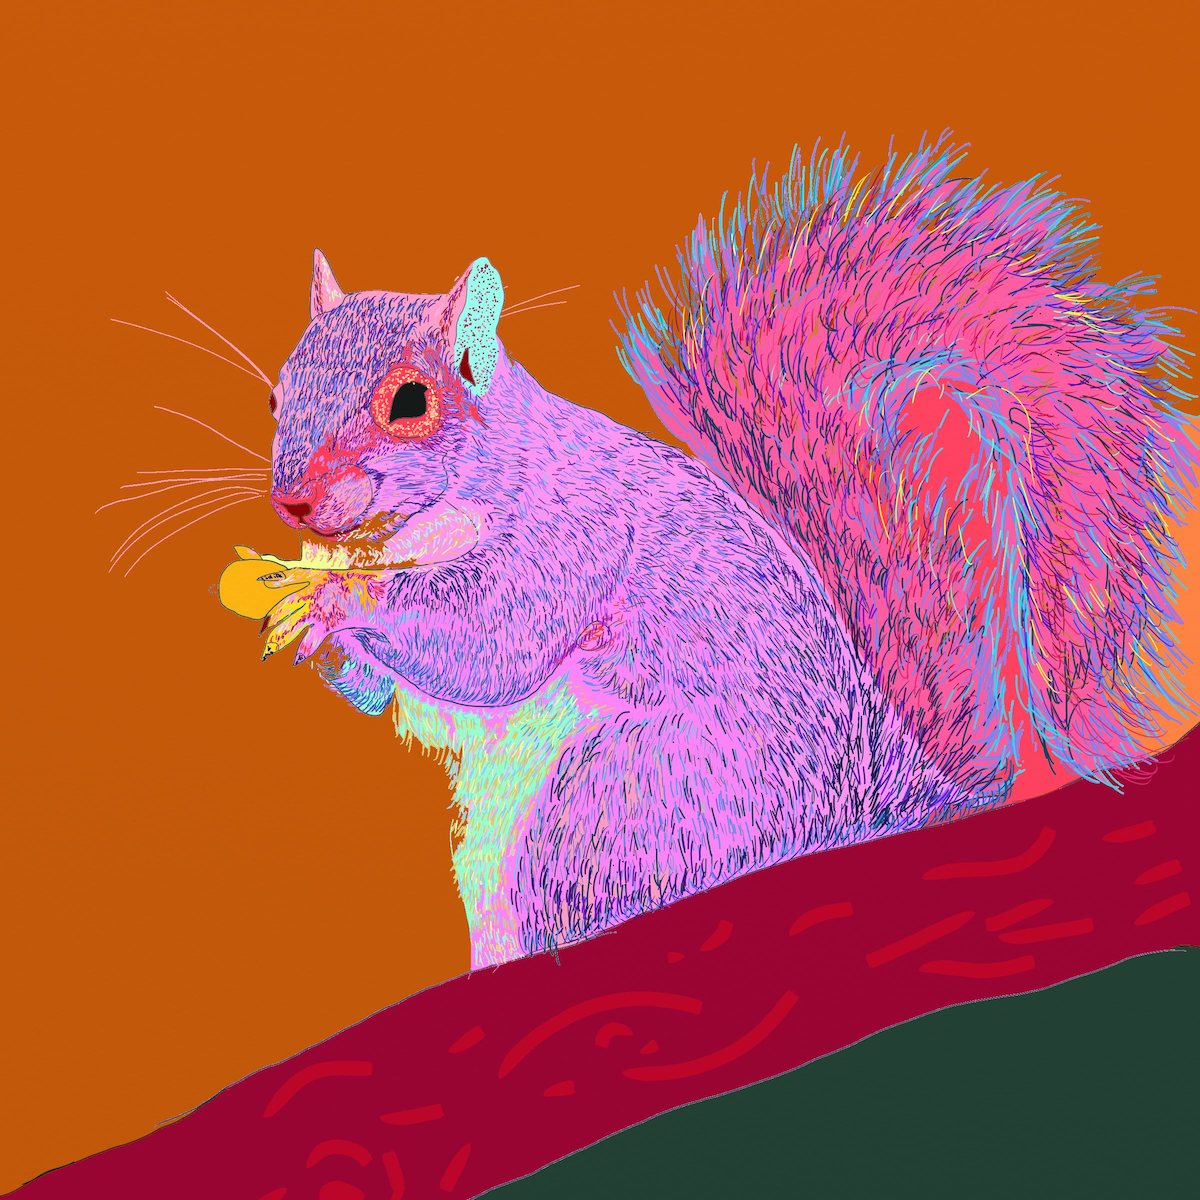 An artwork of a squirrel by Sonny Bean